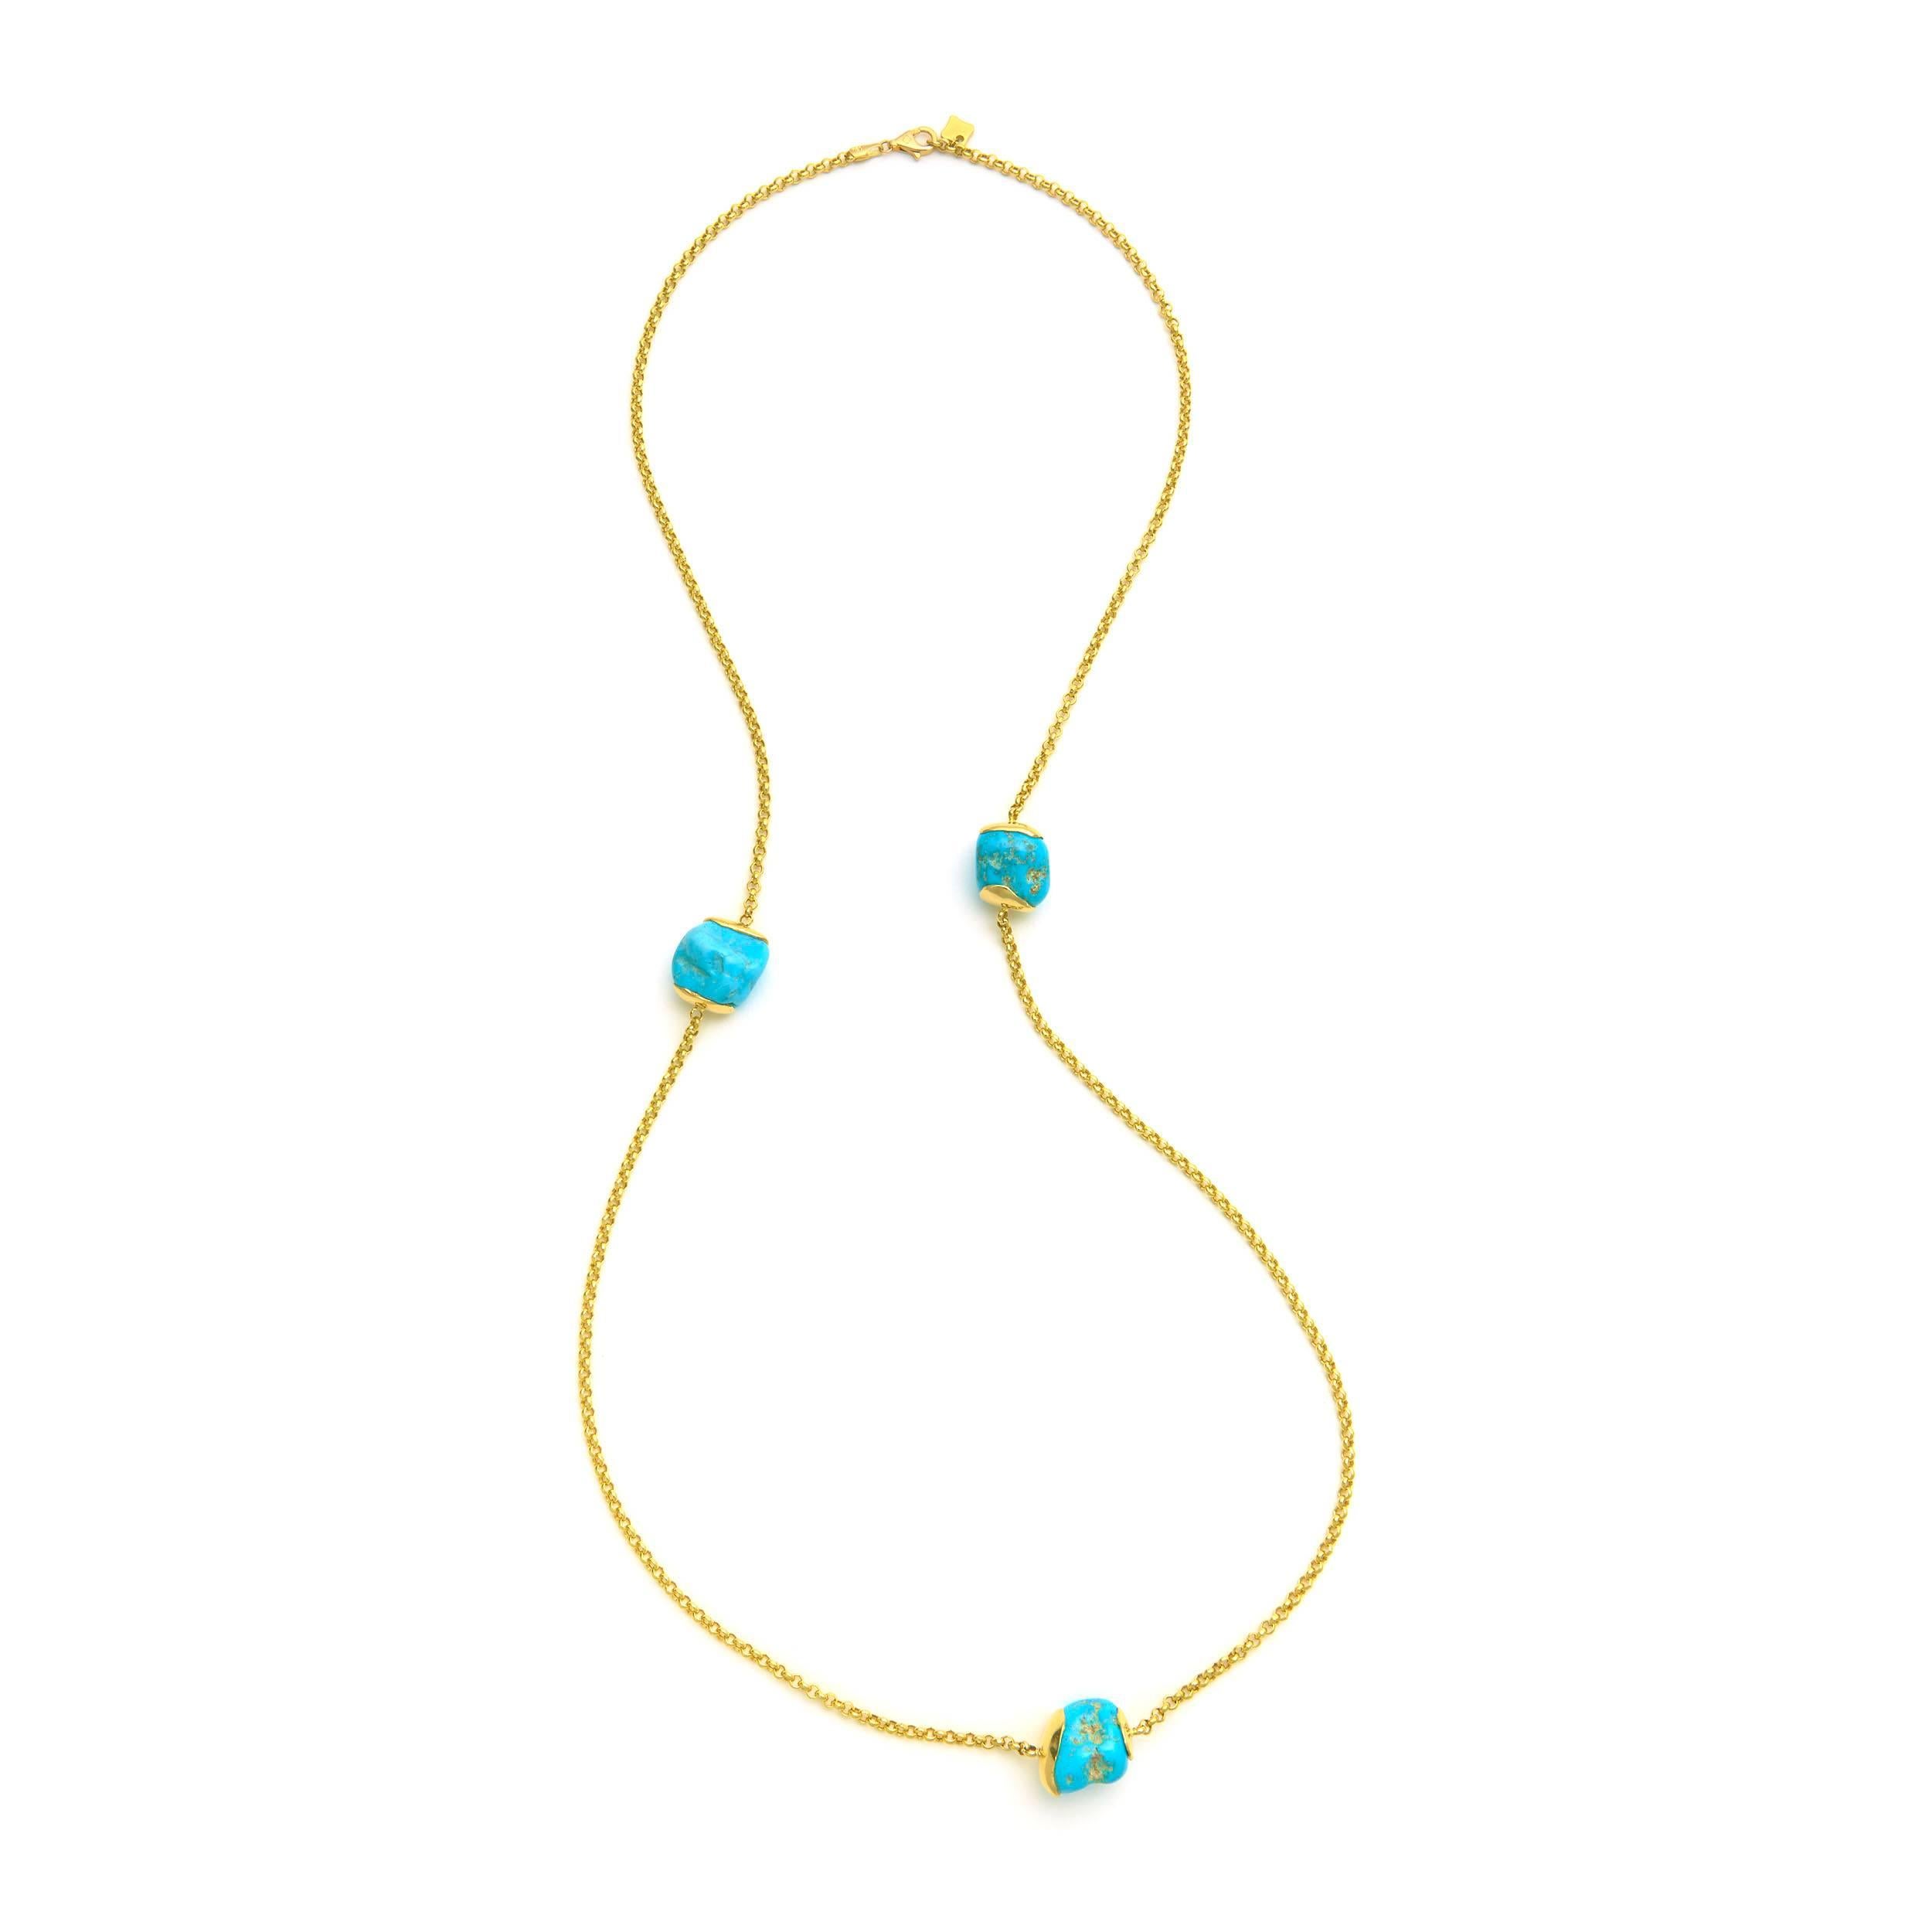 Contemporary Tumbled Turquoise stone , 18 kt  Carat Yellow Gold modern classic chic necklace